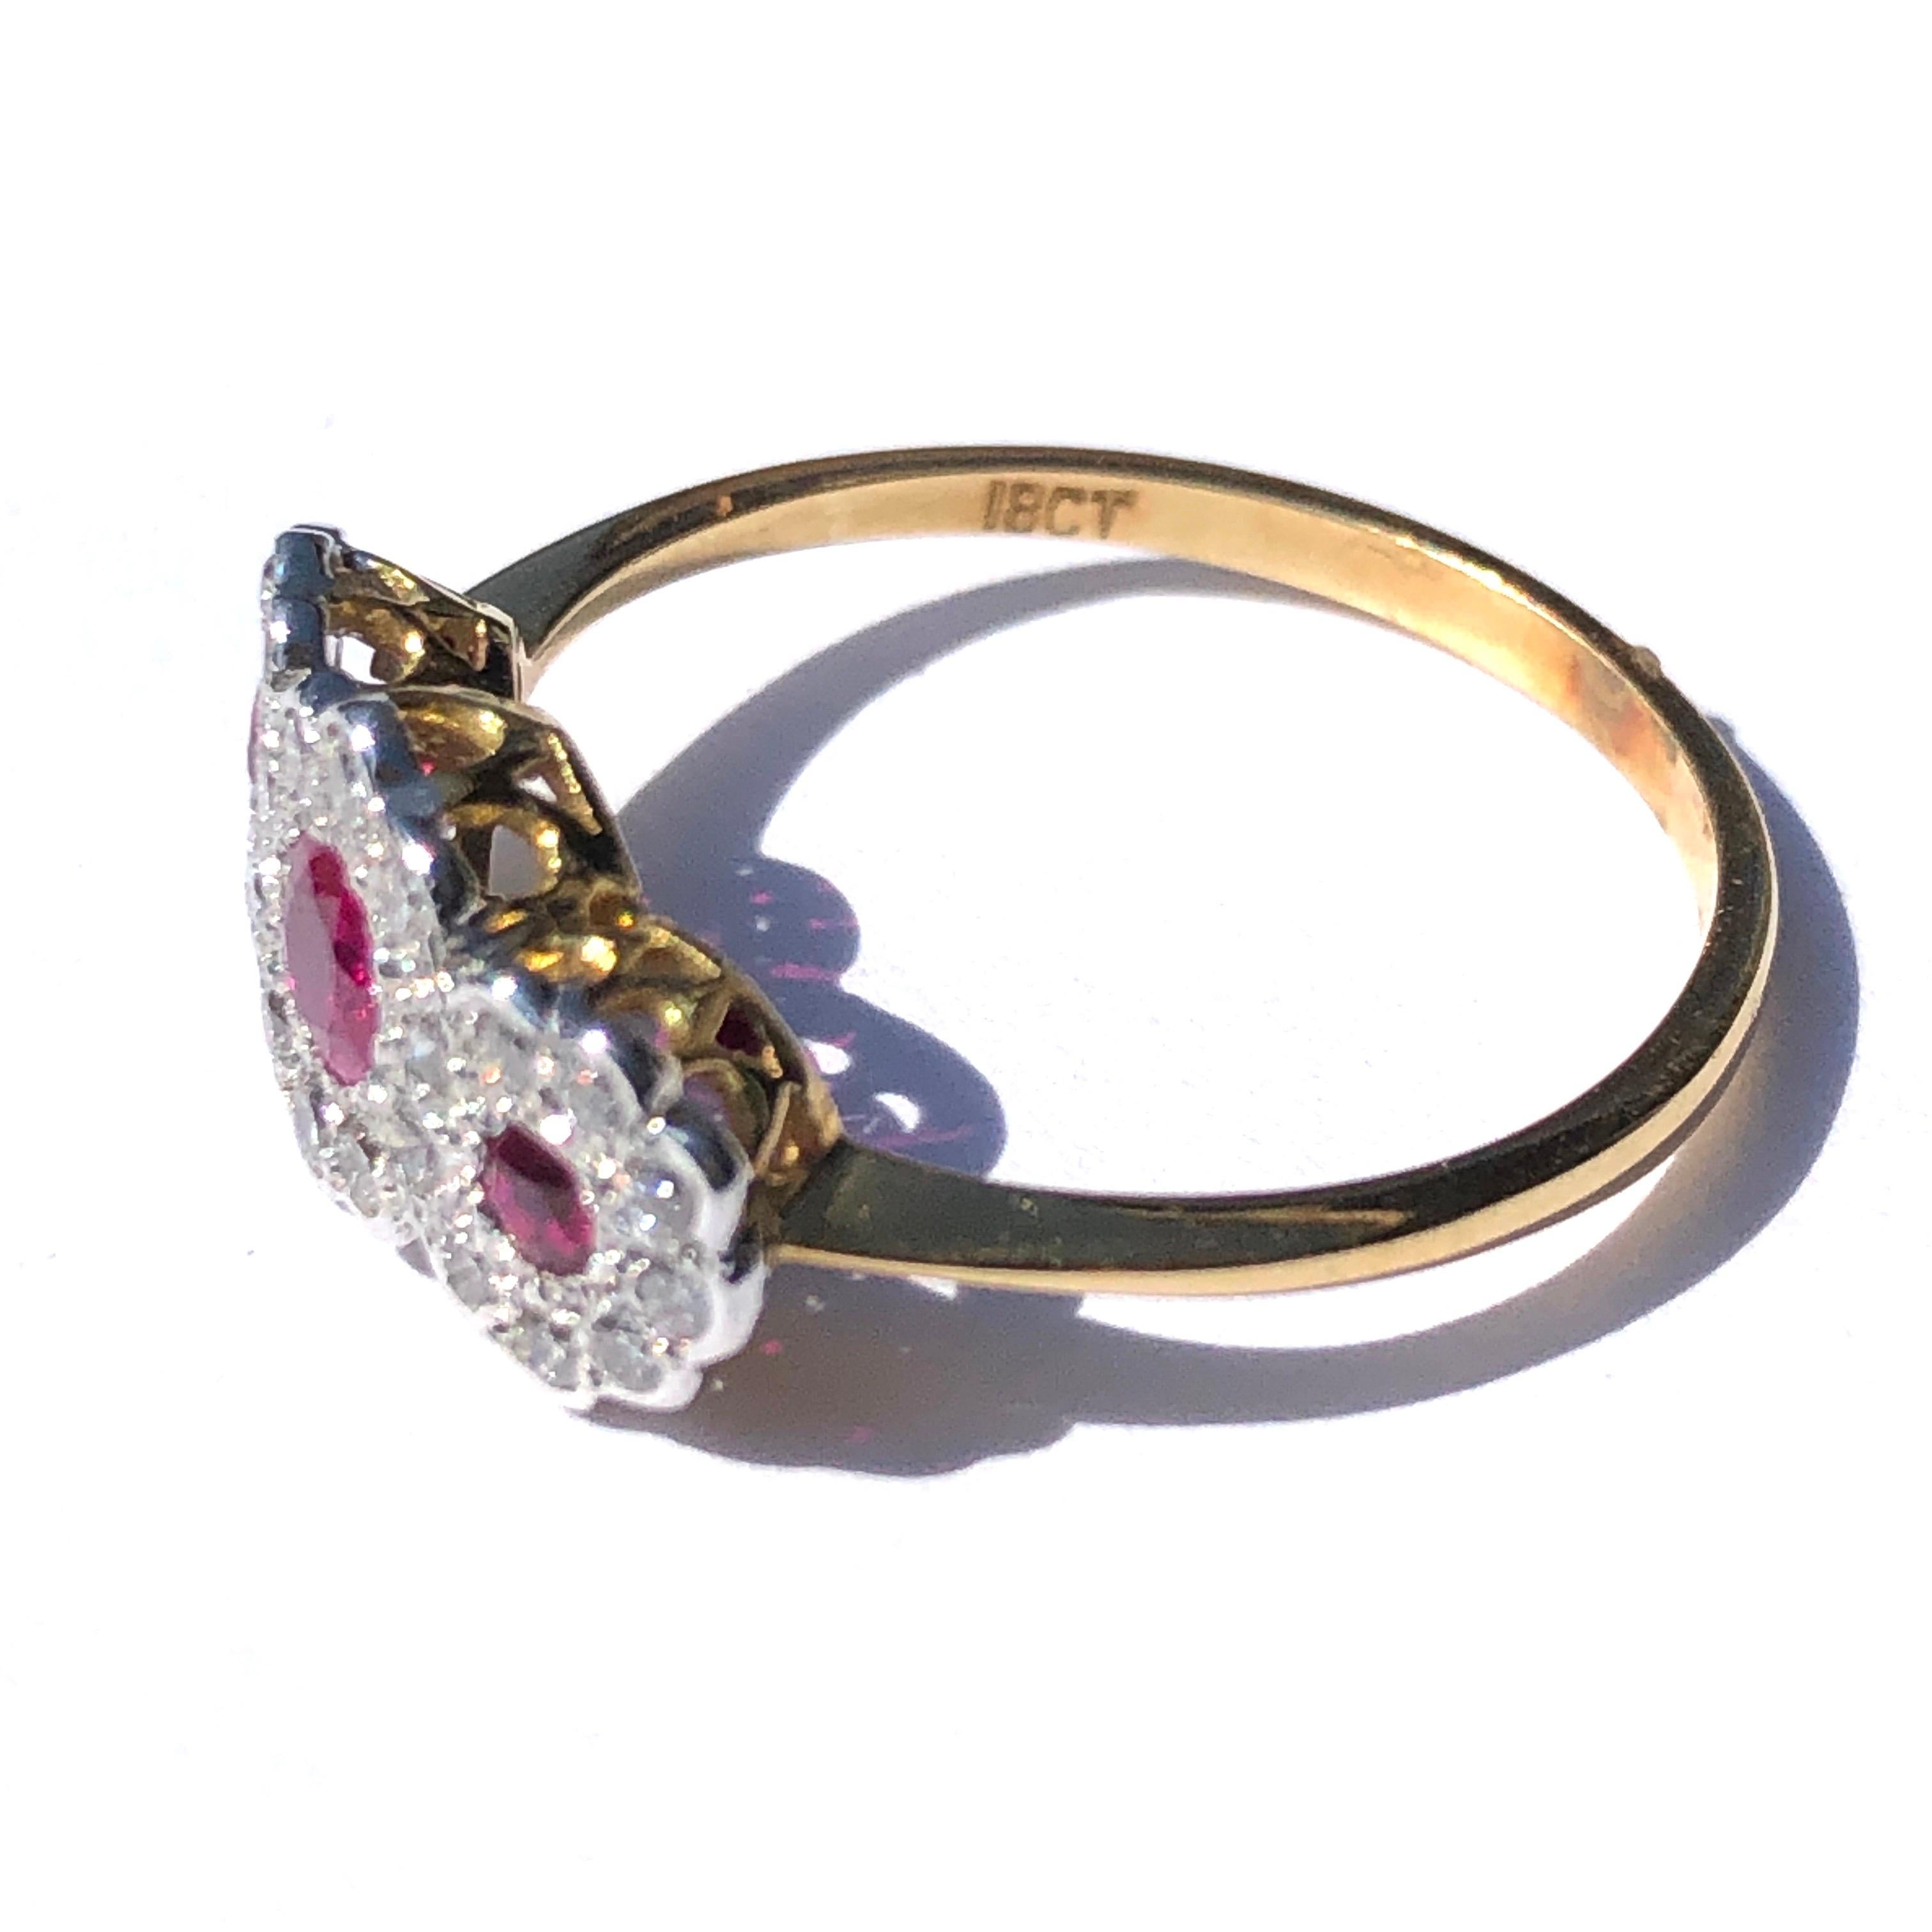 The sparkle of this ring is impossible to catch in a photo! It is simply stunning! The rubies at the centre of each cluster are a deep, rich pink colour and are all round cut, the diamonds total 20pts each and surround each ruby adding so much